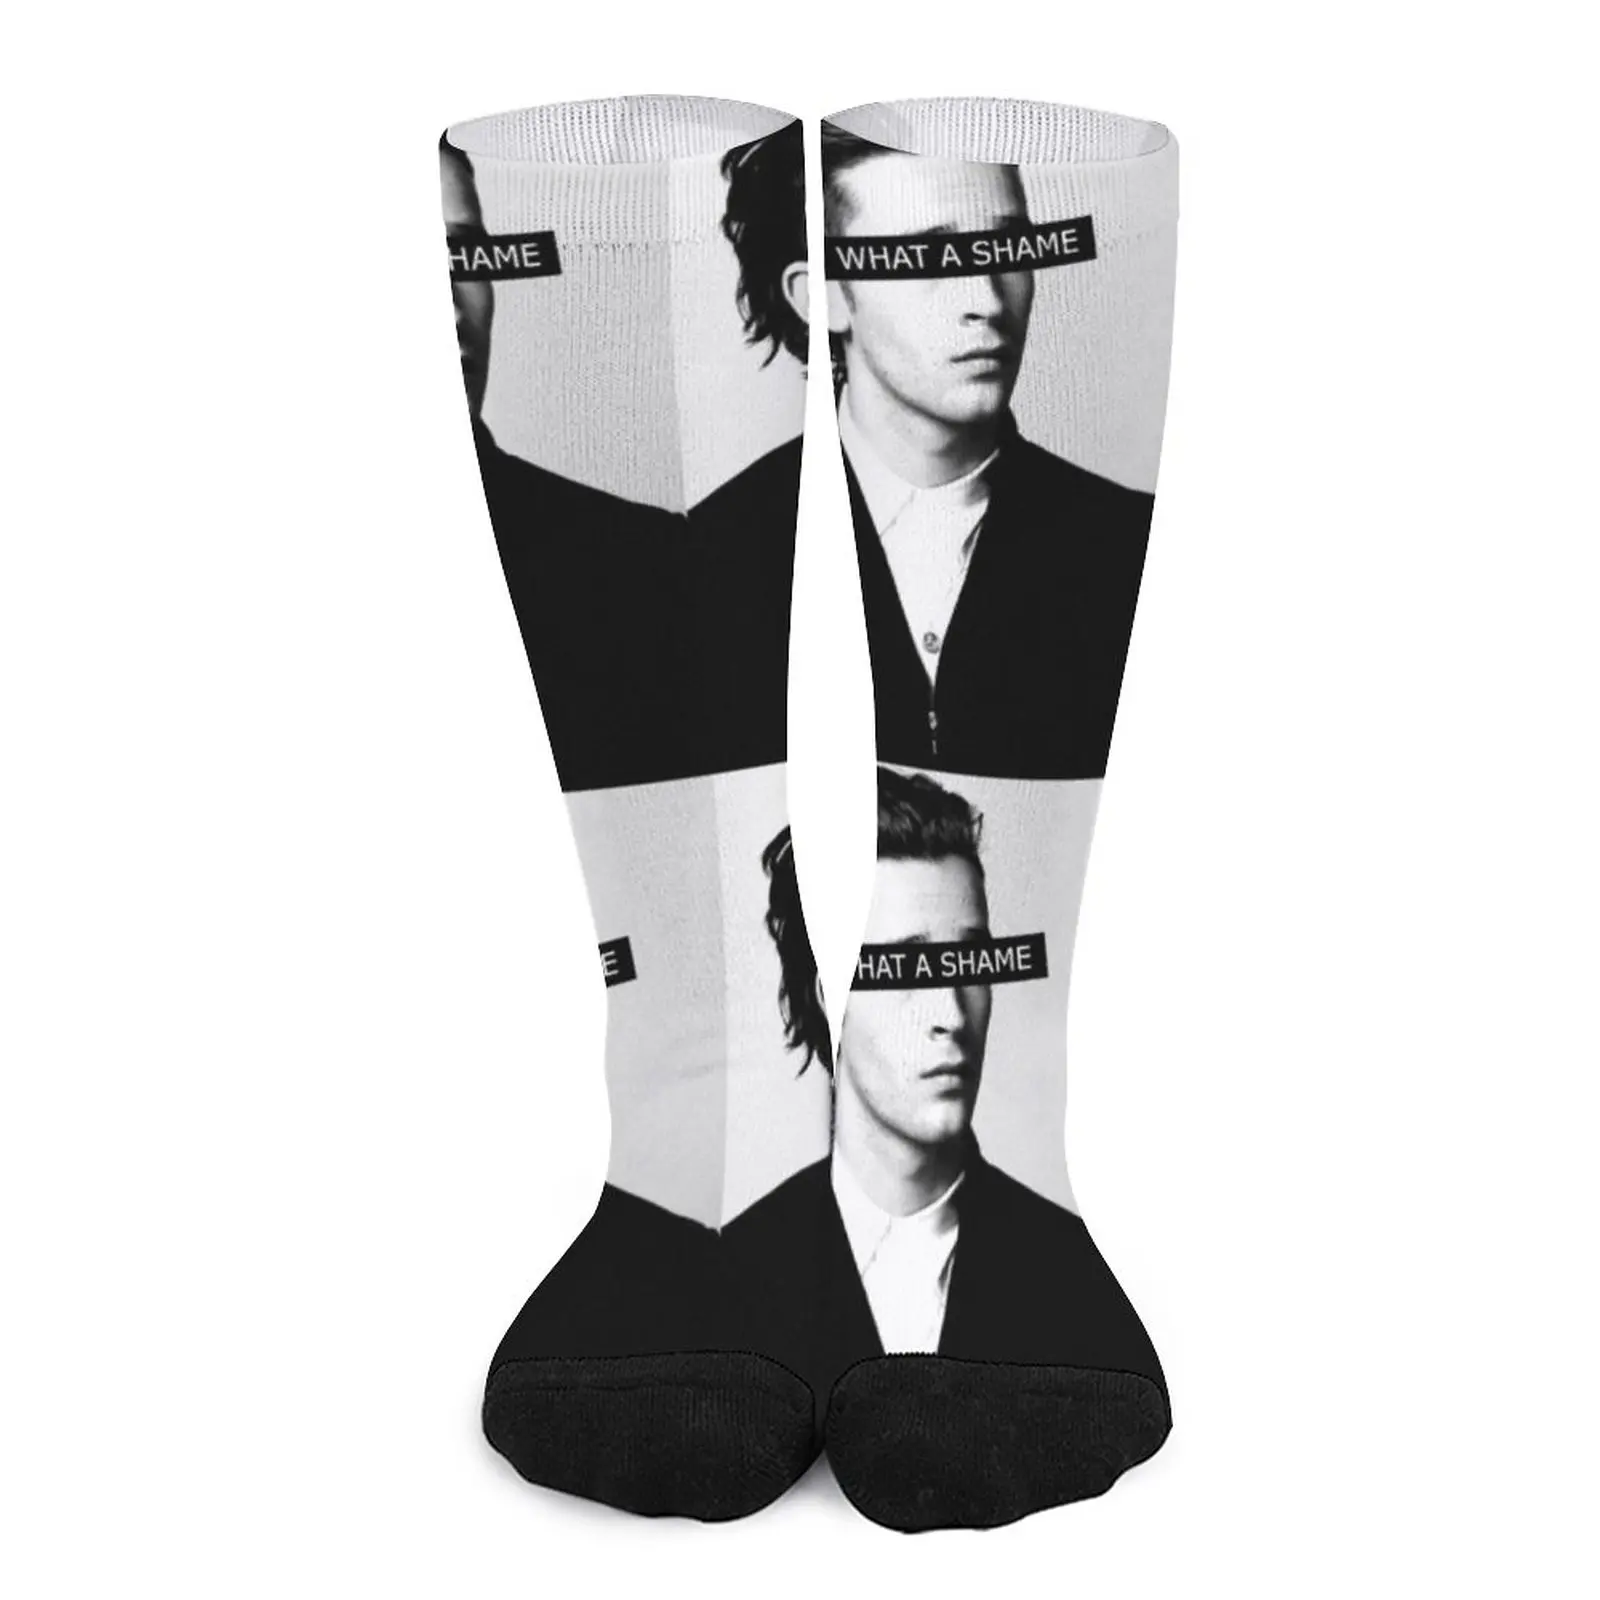 WHAT A SHAME - Matty Healy of The 1975 Socks happy socks Wholesale the 1975 the 1975